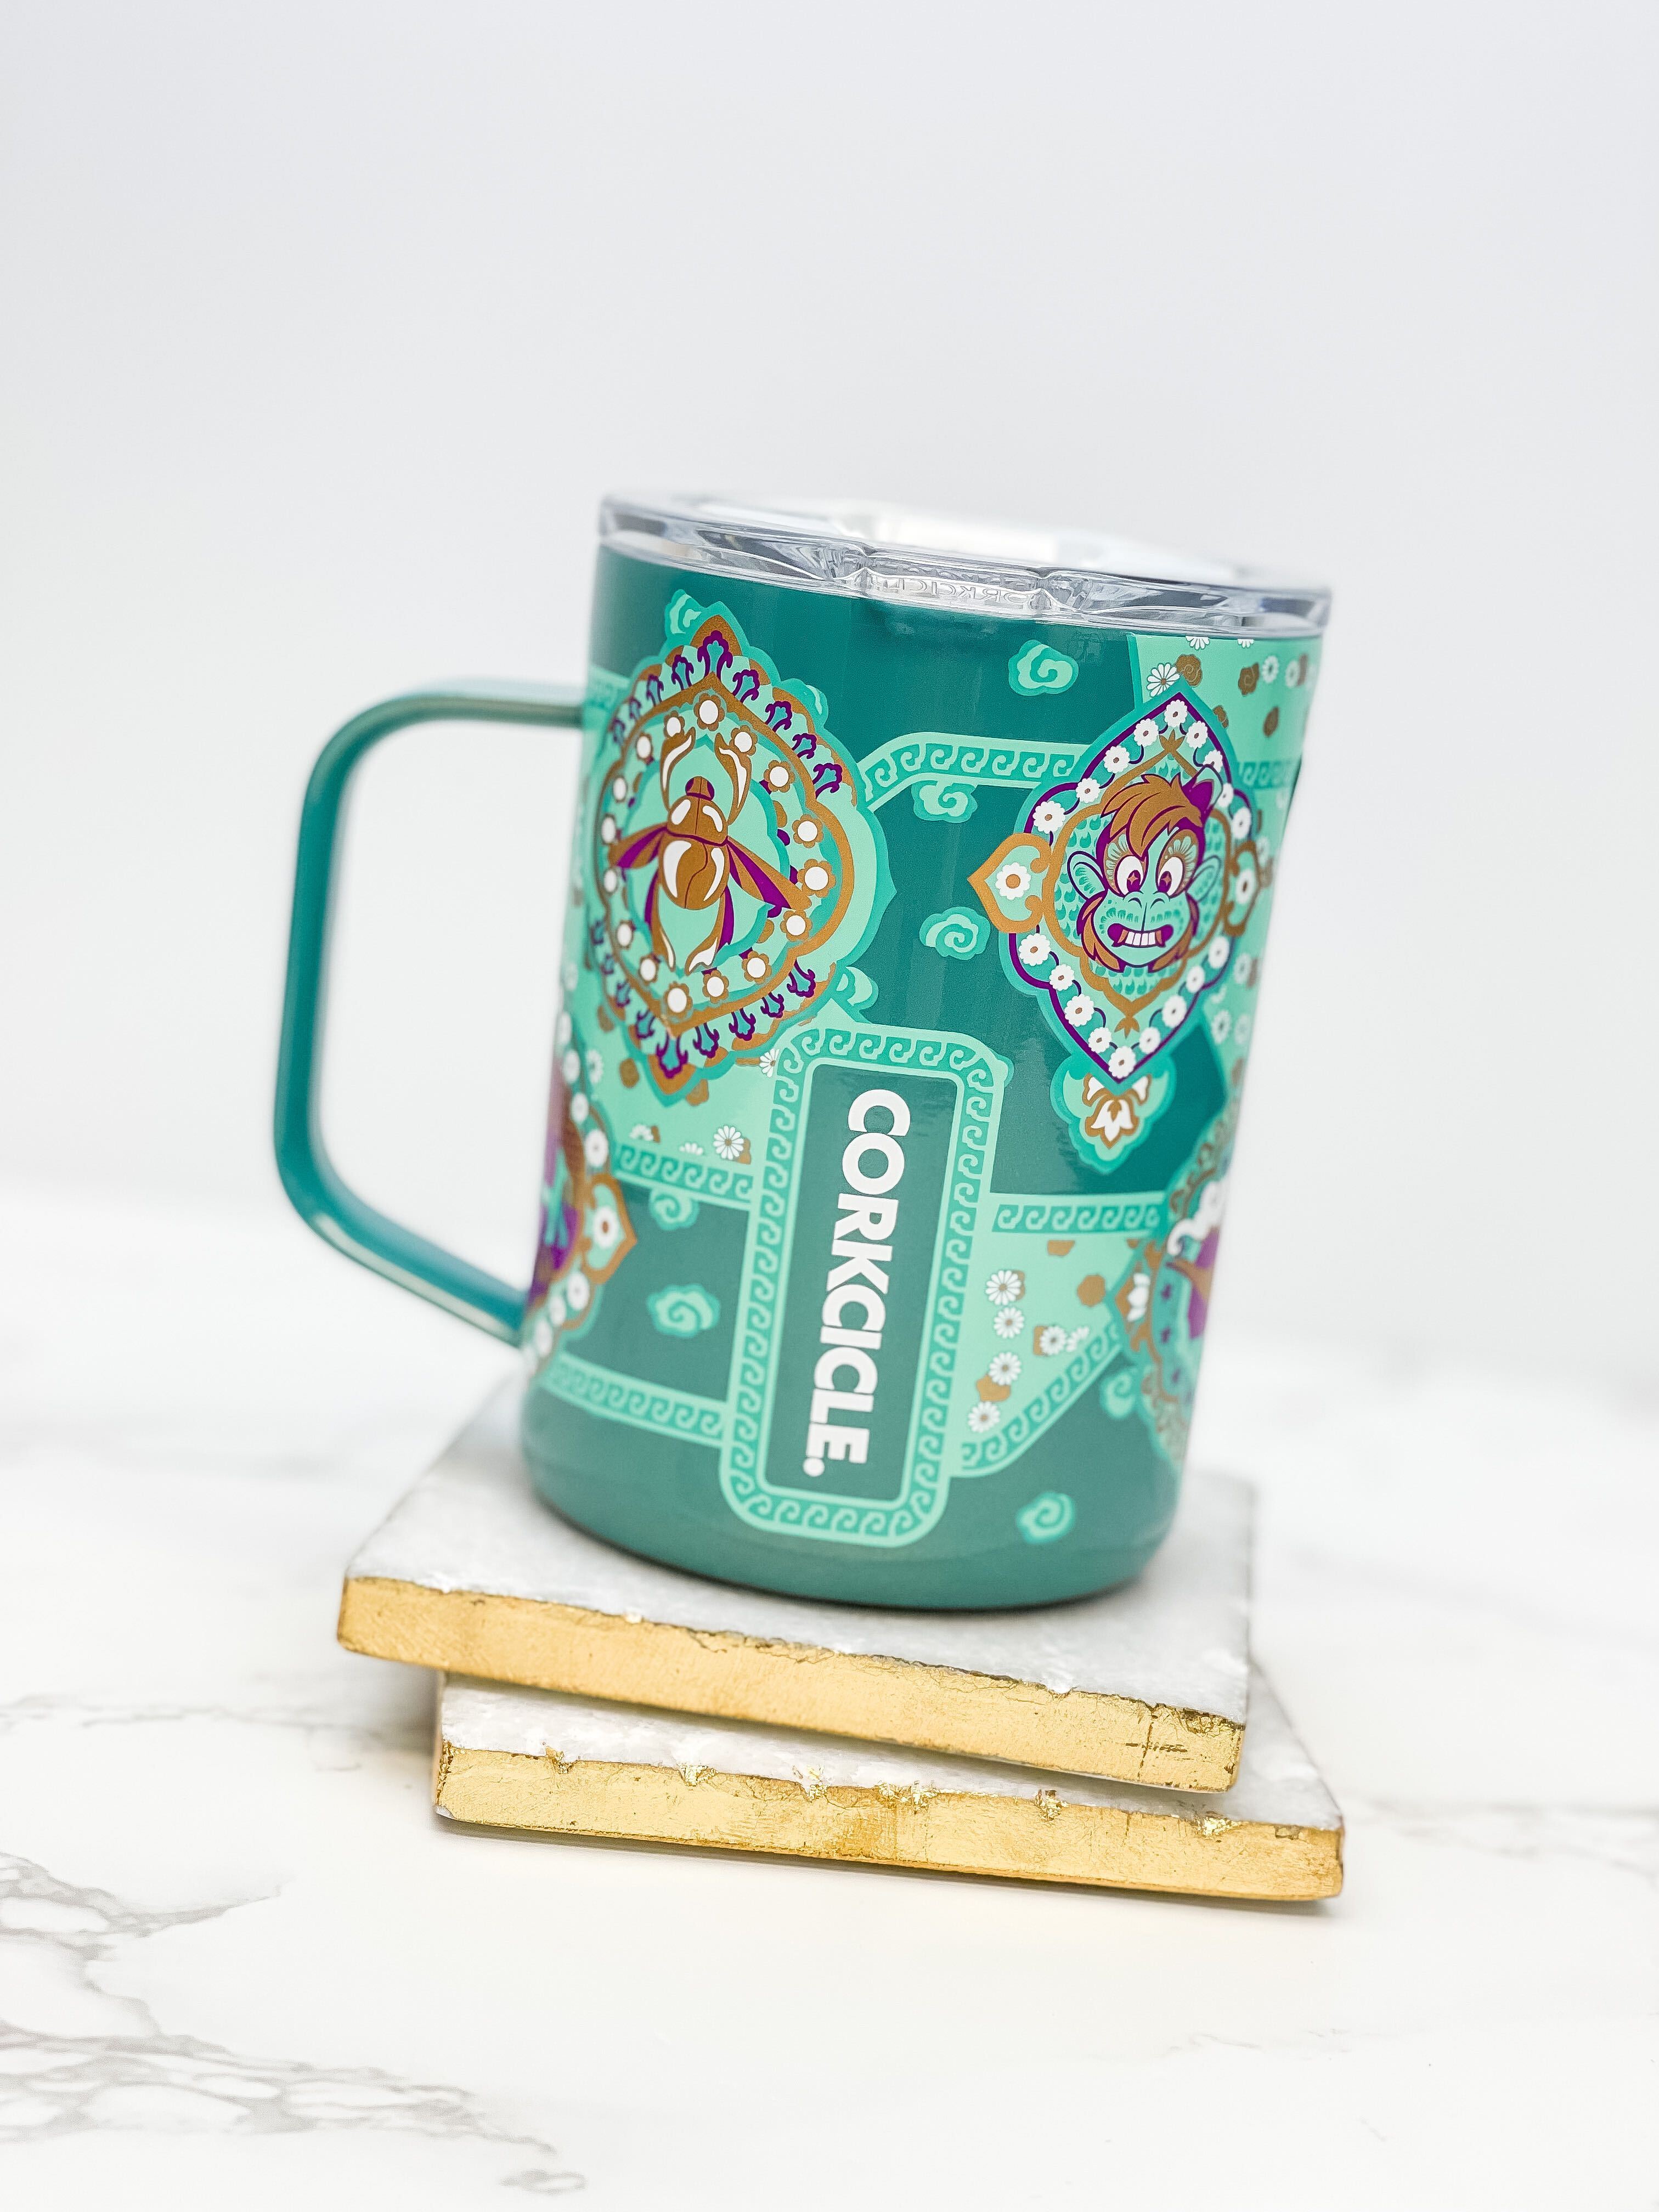 16 oz Coffee Mug in Cotton Candy from Corkcicle, Insulated Travel Mug